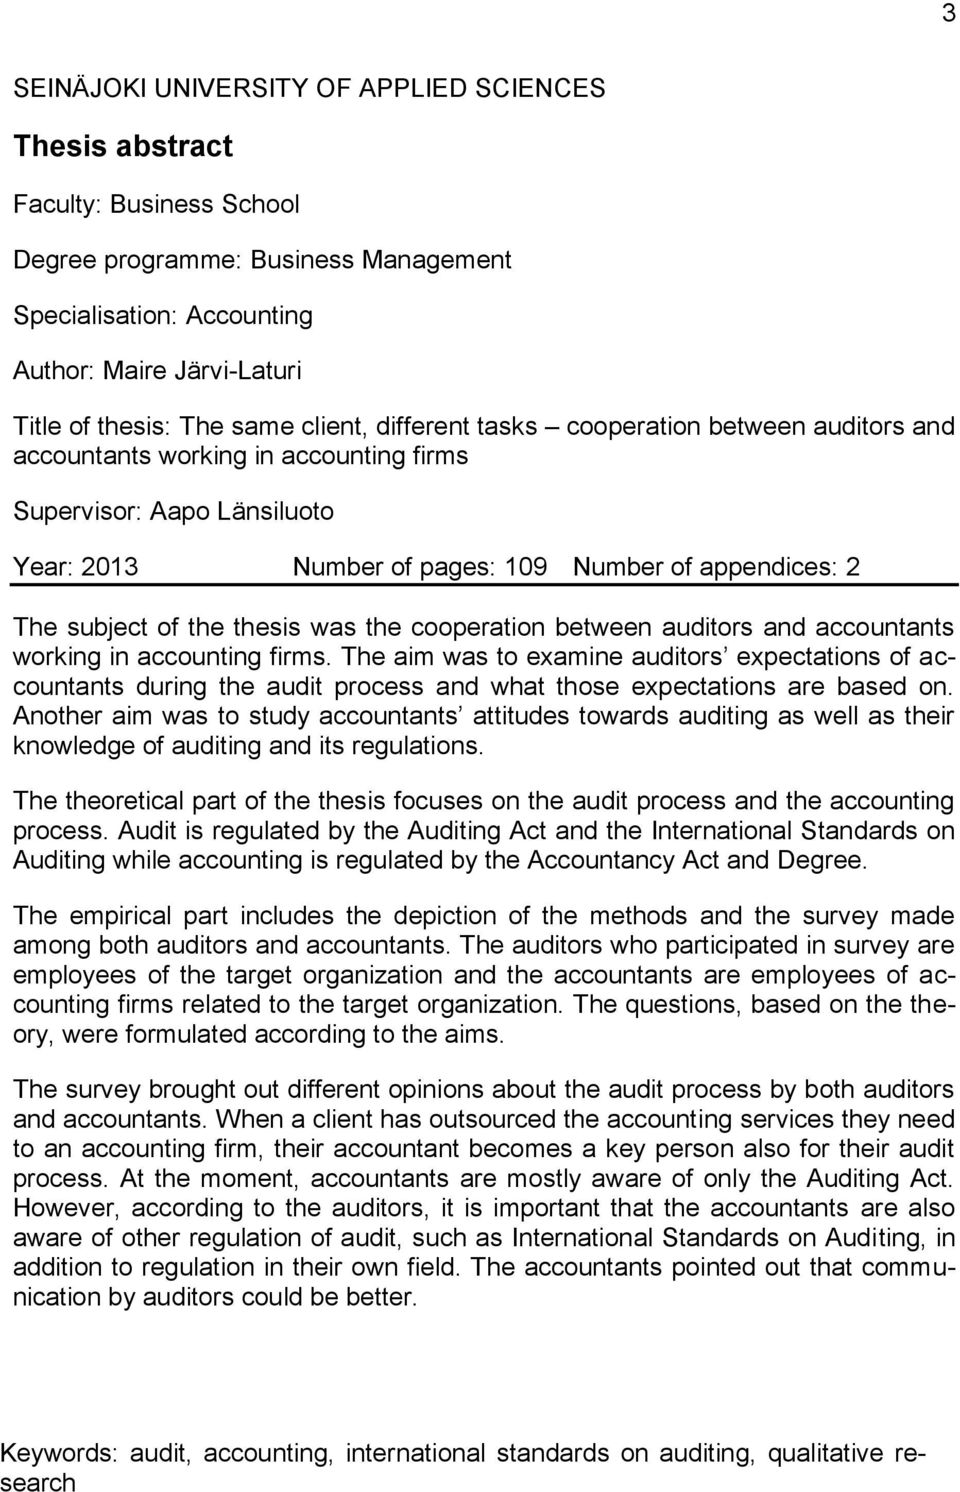 of the thesis was the cooperation between auditors and accountants working in accounting firms.